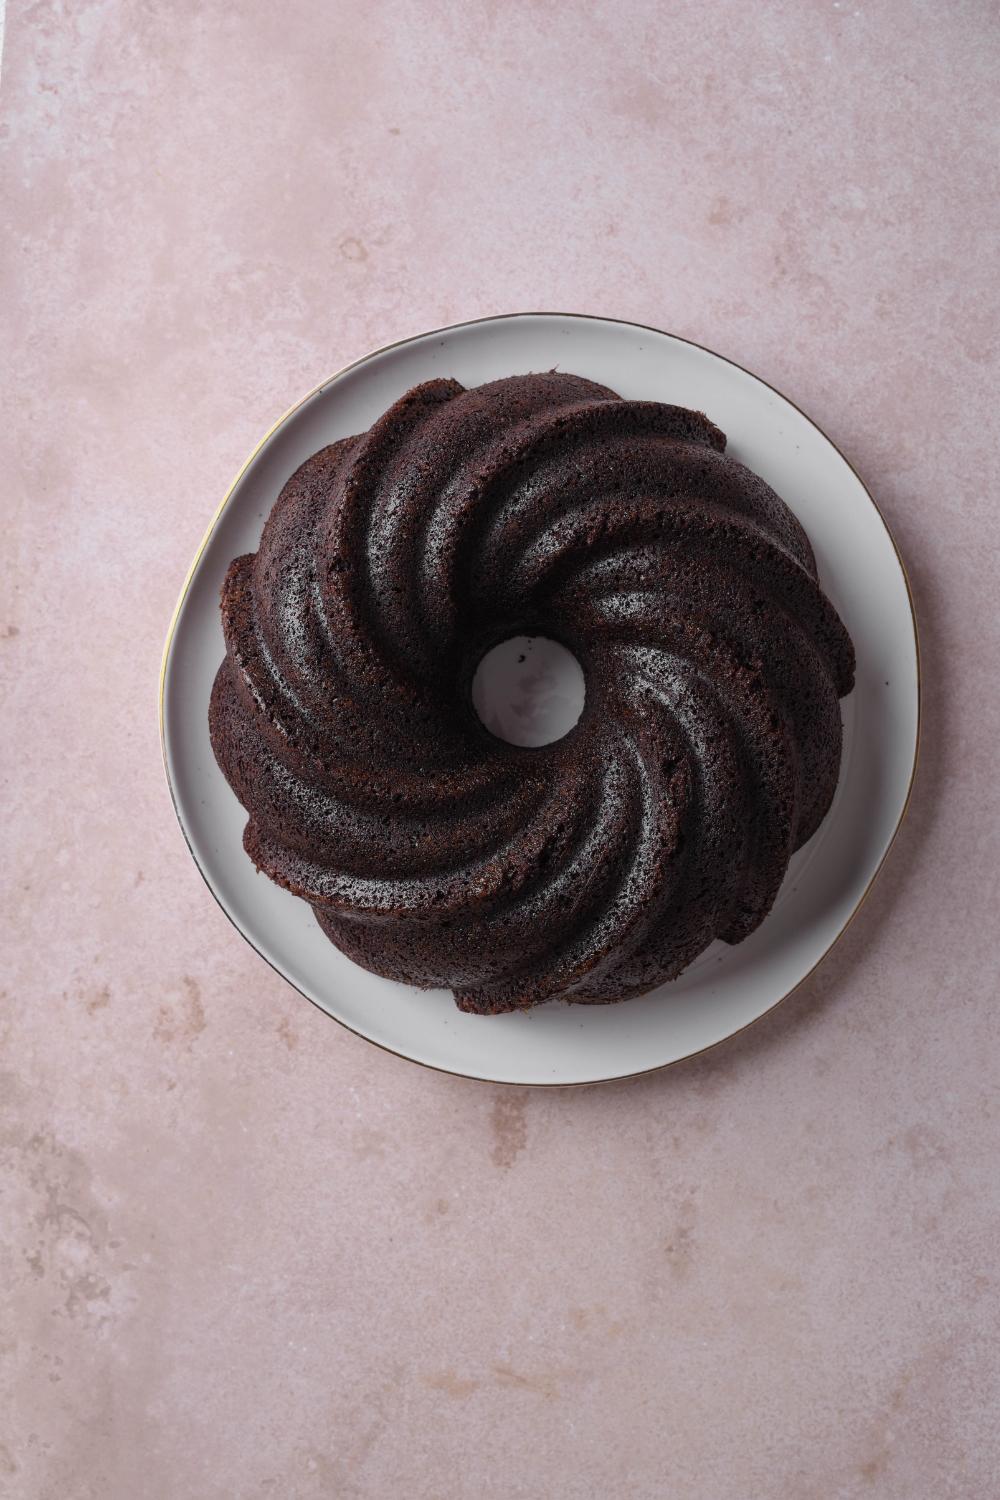 A baked and cooled chocolate pound cake is sitting on a white serving plate.